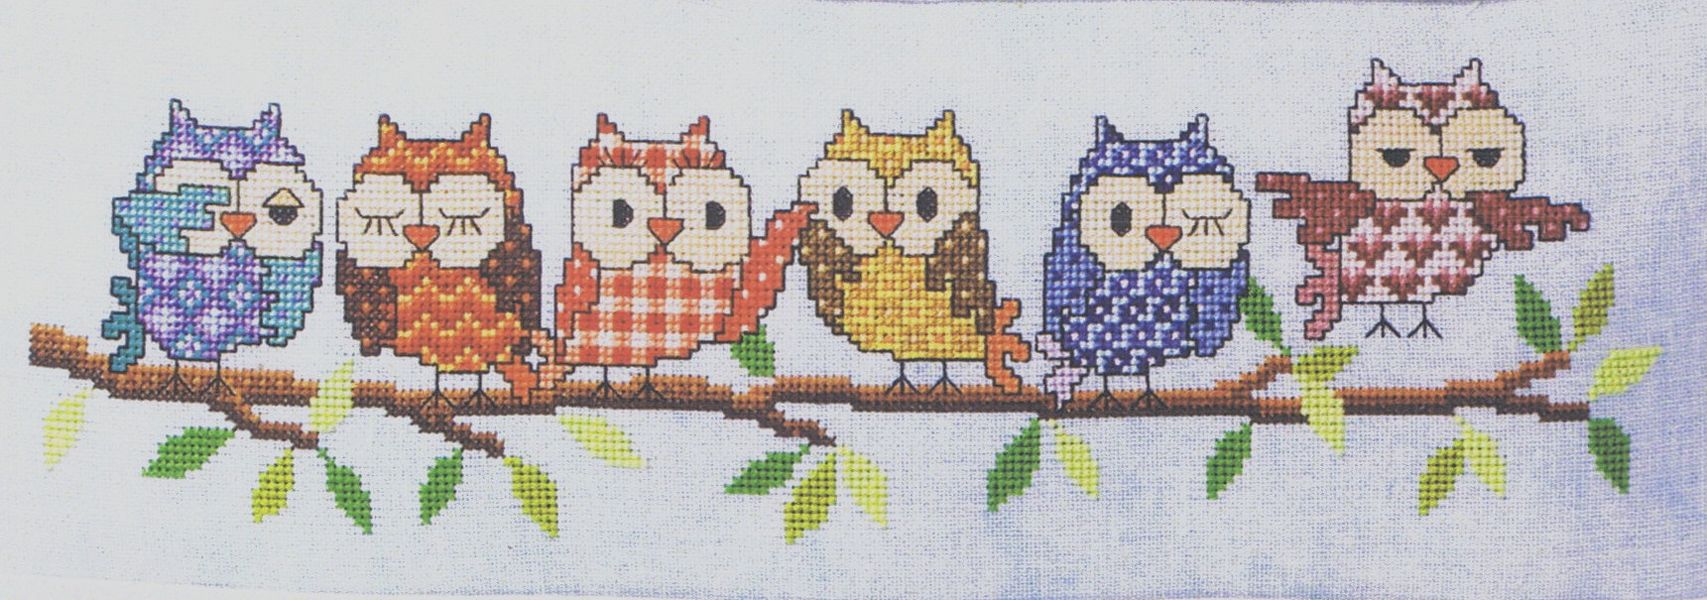 Owl White CaptainCrafts Hot New Releases Cross Stitch Kits Patterns Embroidery Kit 